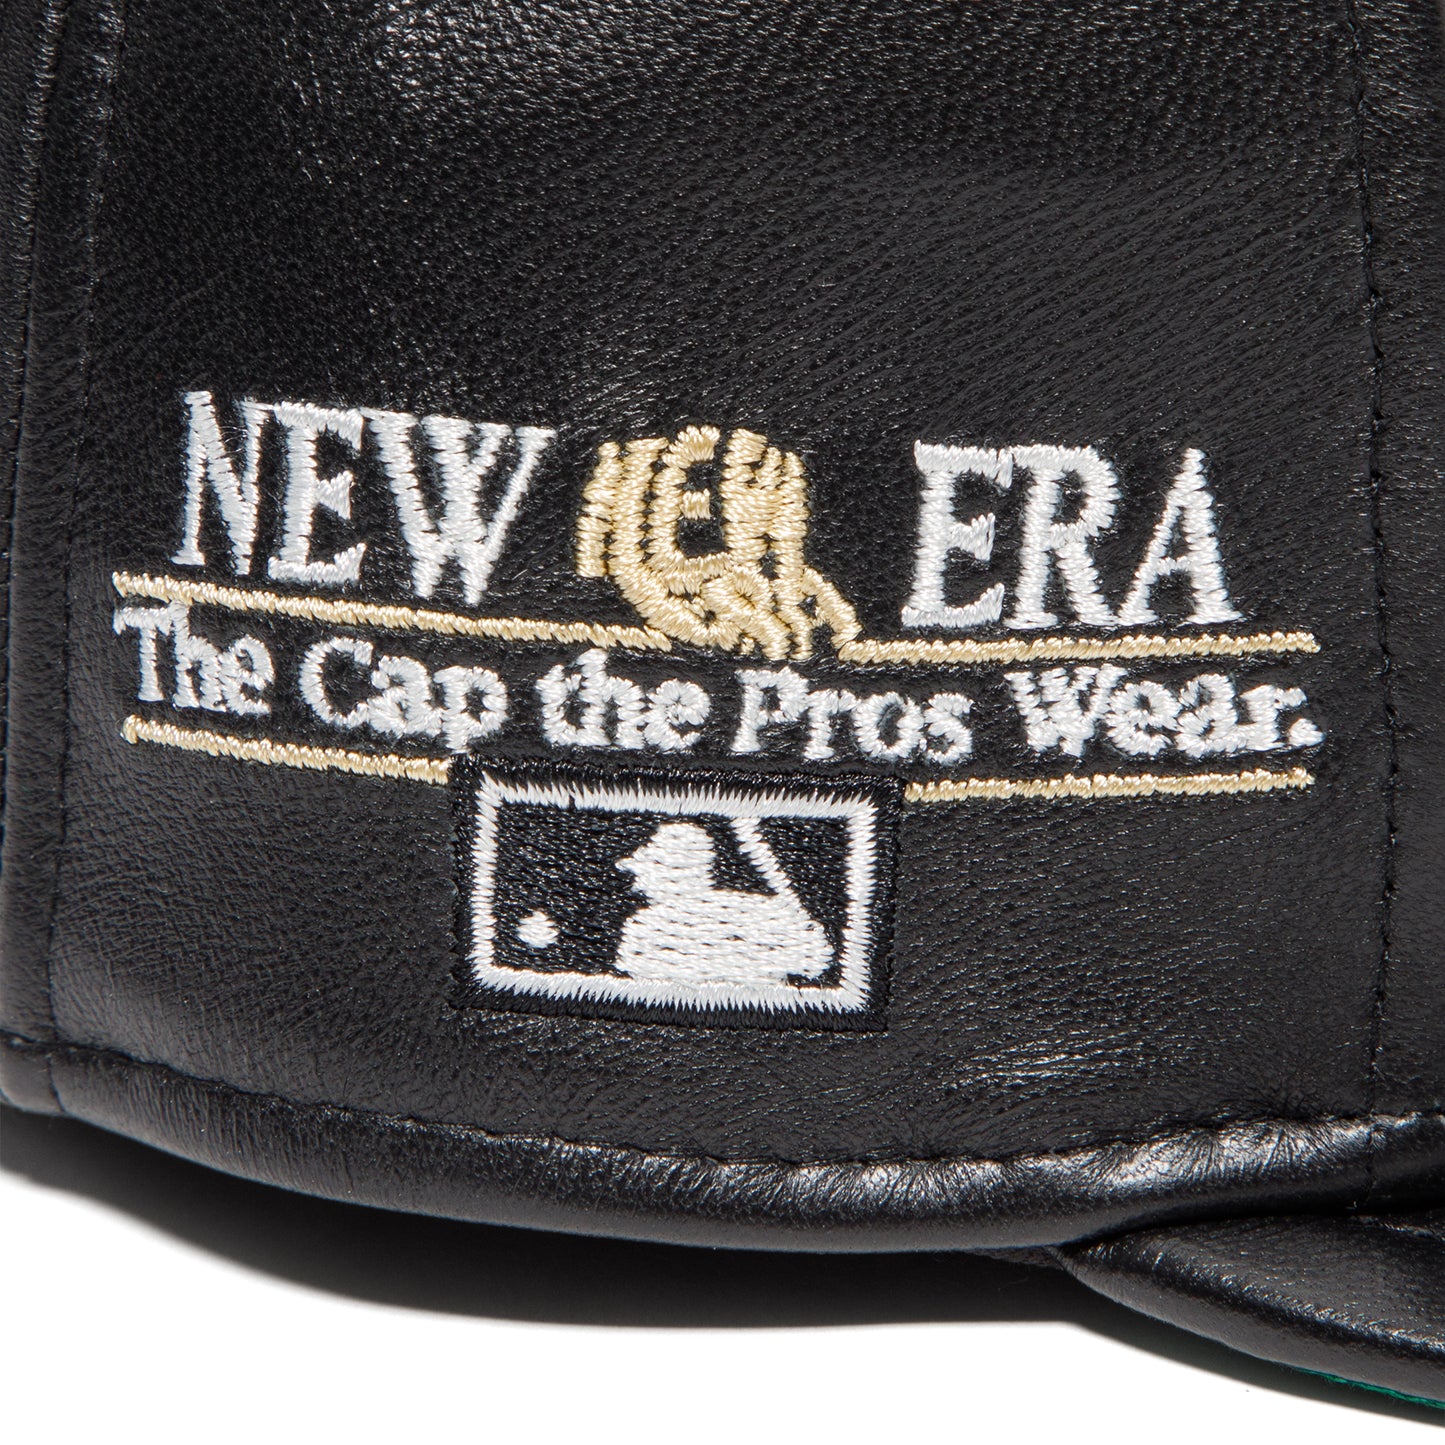 New Era 59FIfty Fitted Hat (Black)